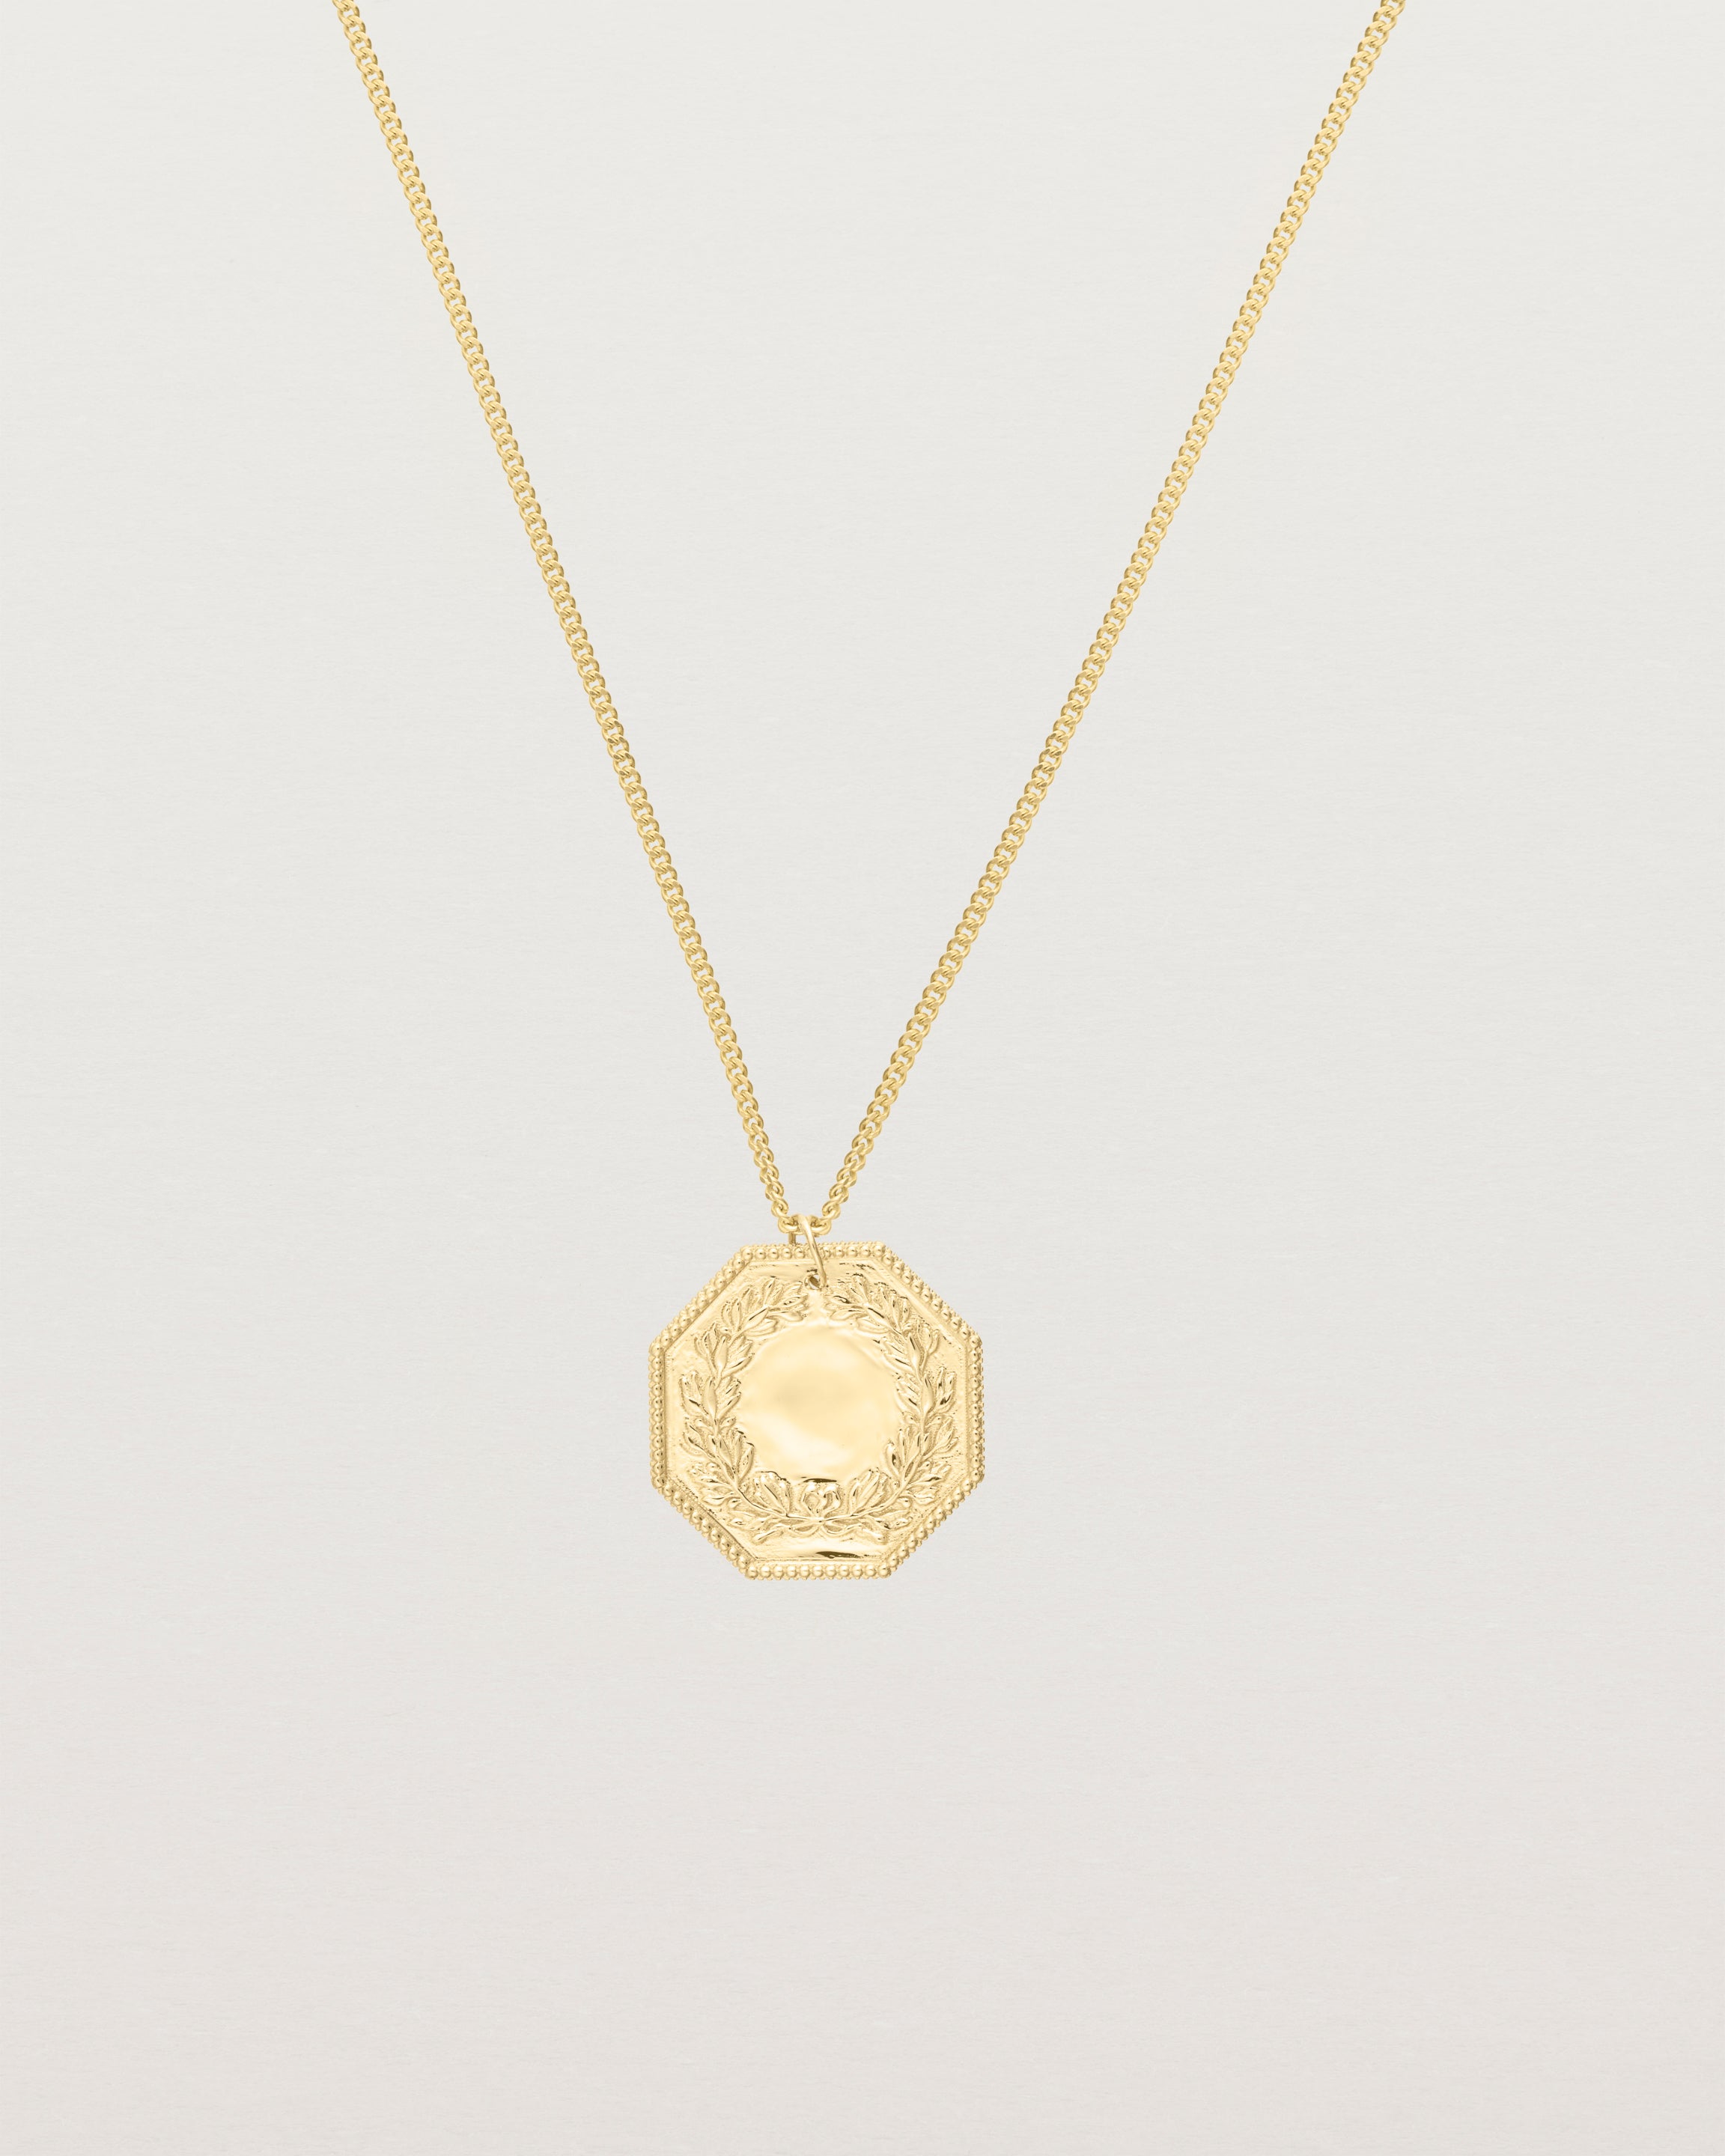 Back view of the Aeneid Necklace in yellow gold.